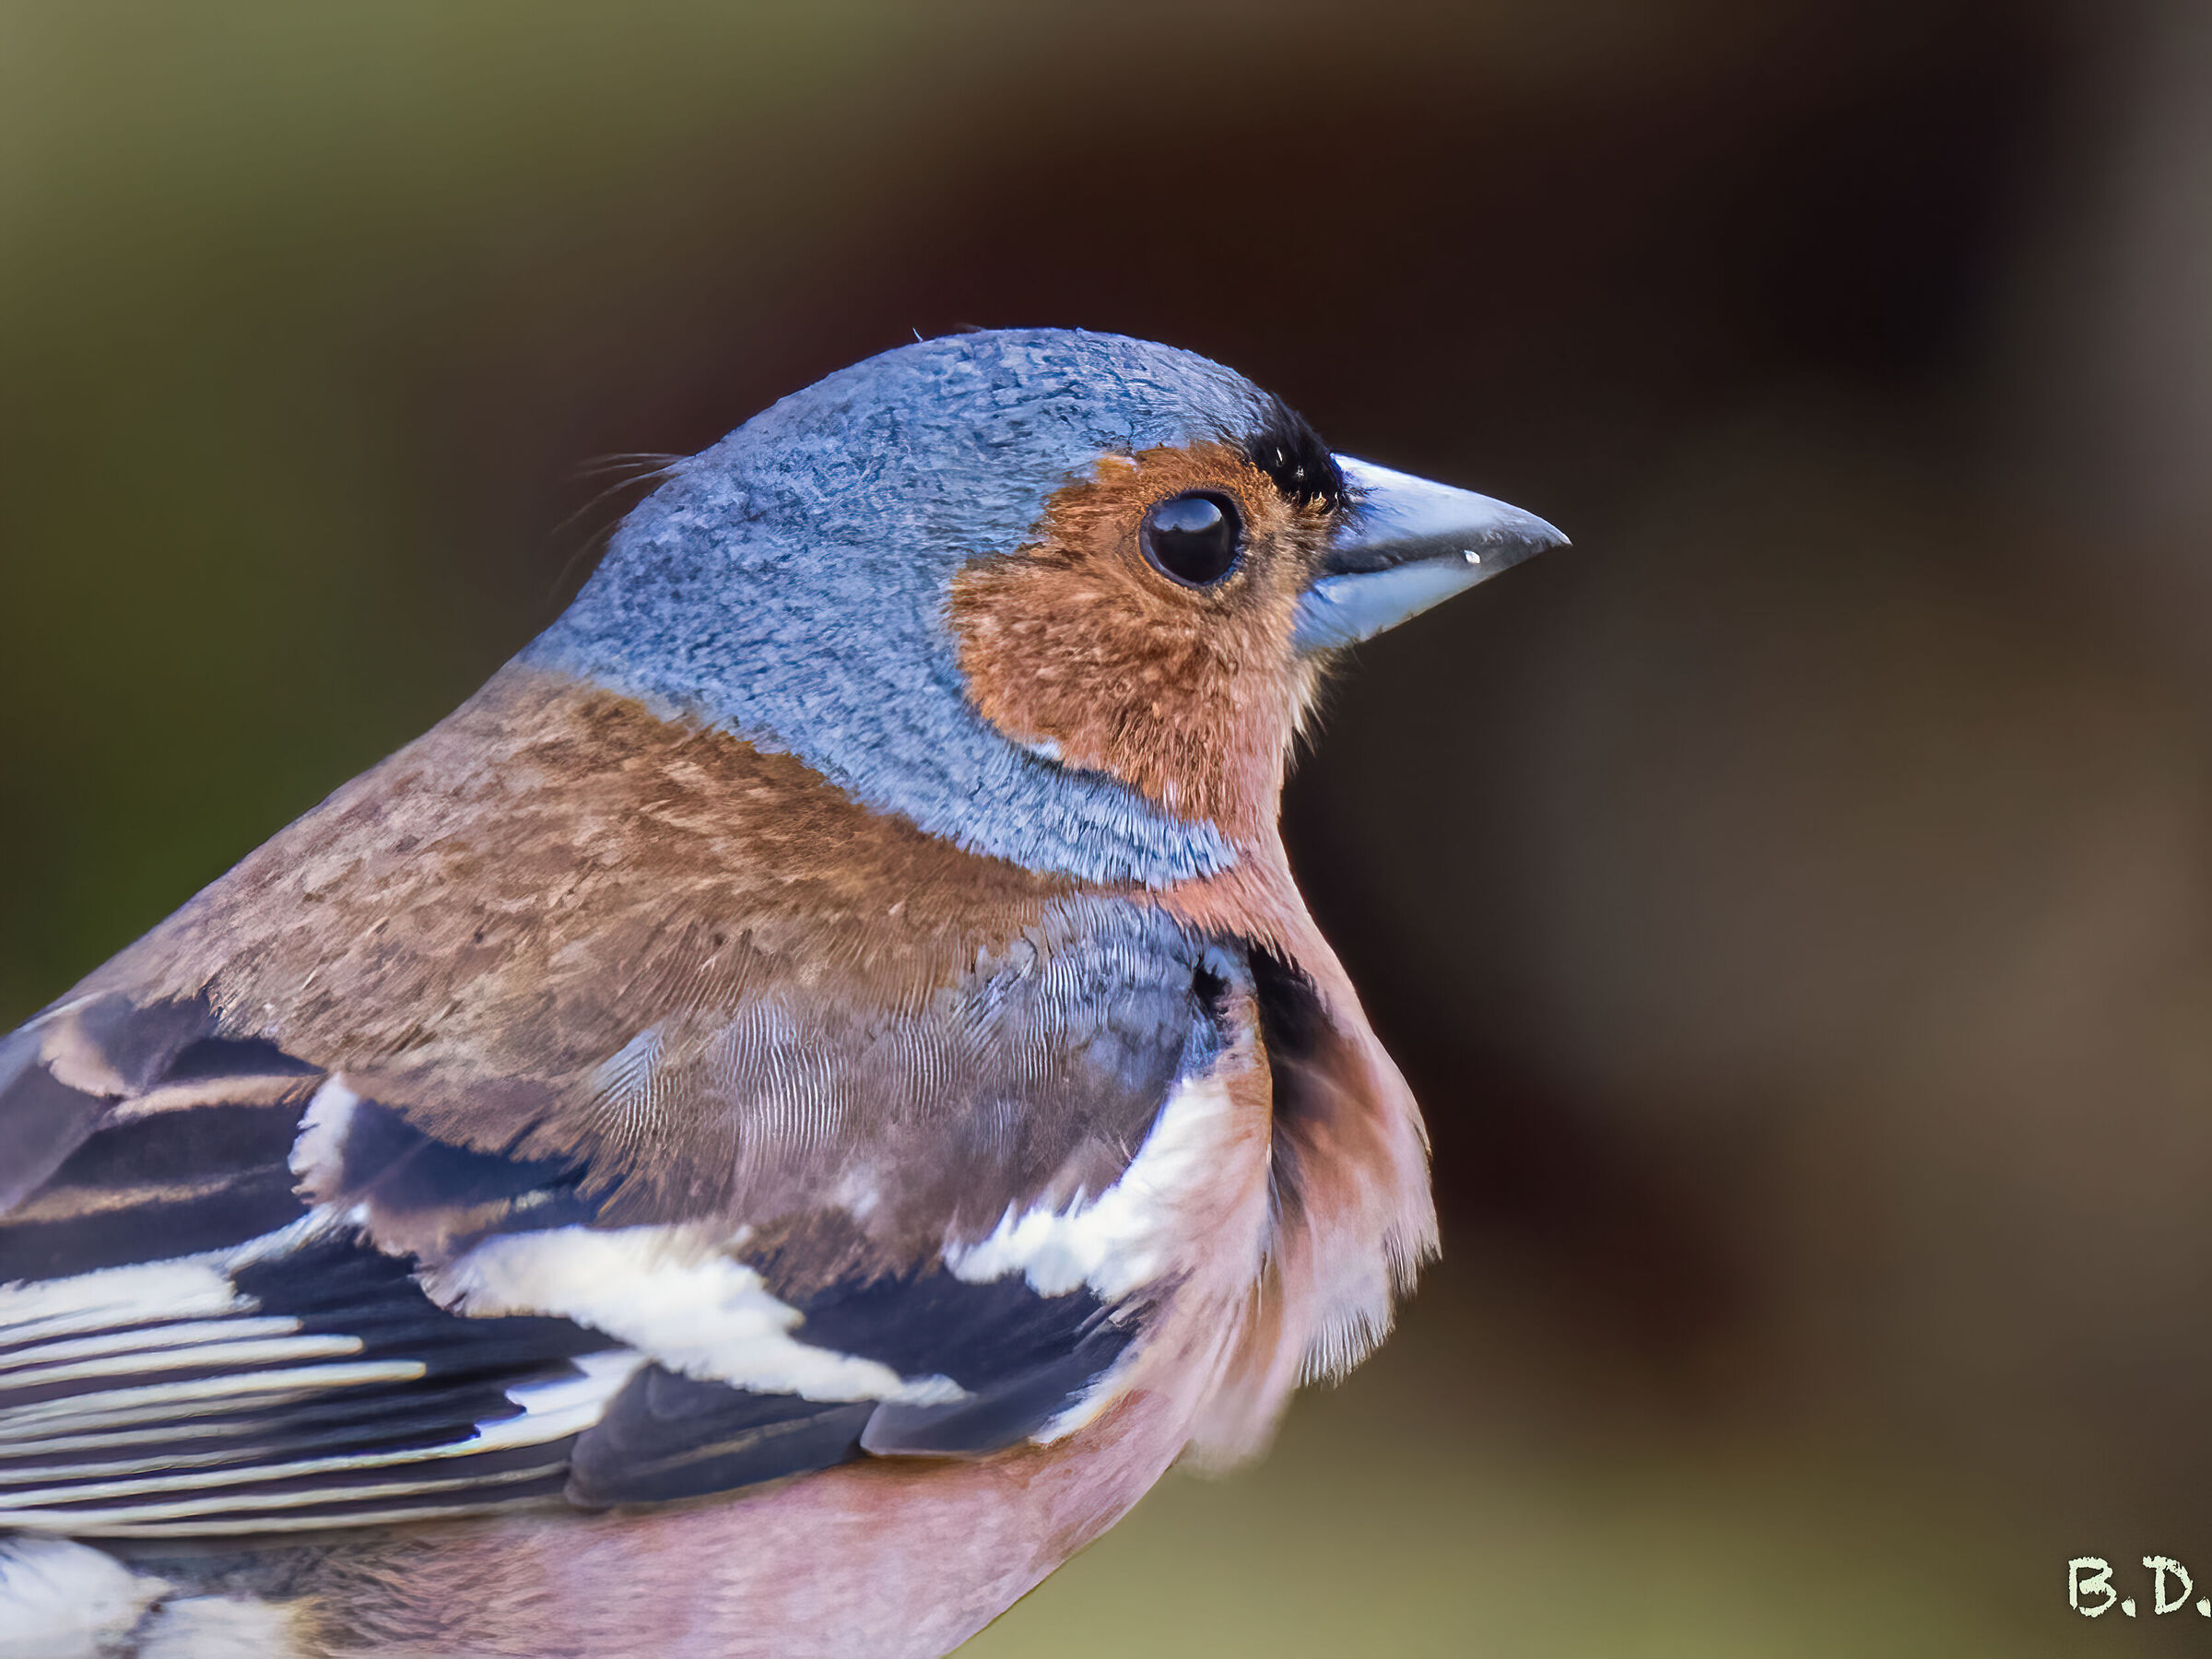 Chaffinch in the wind...